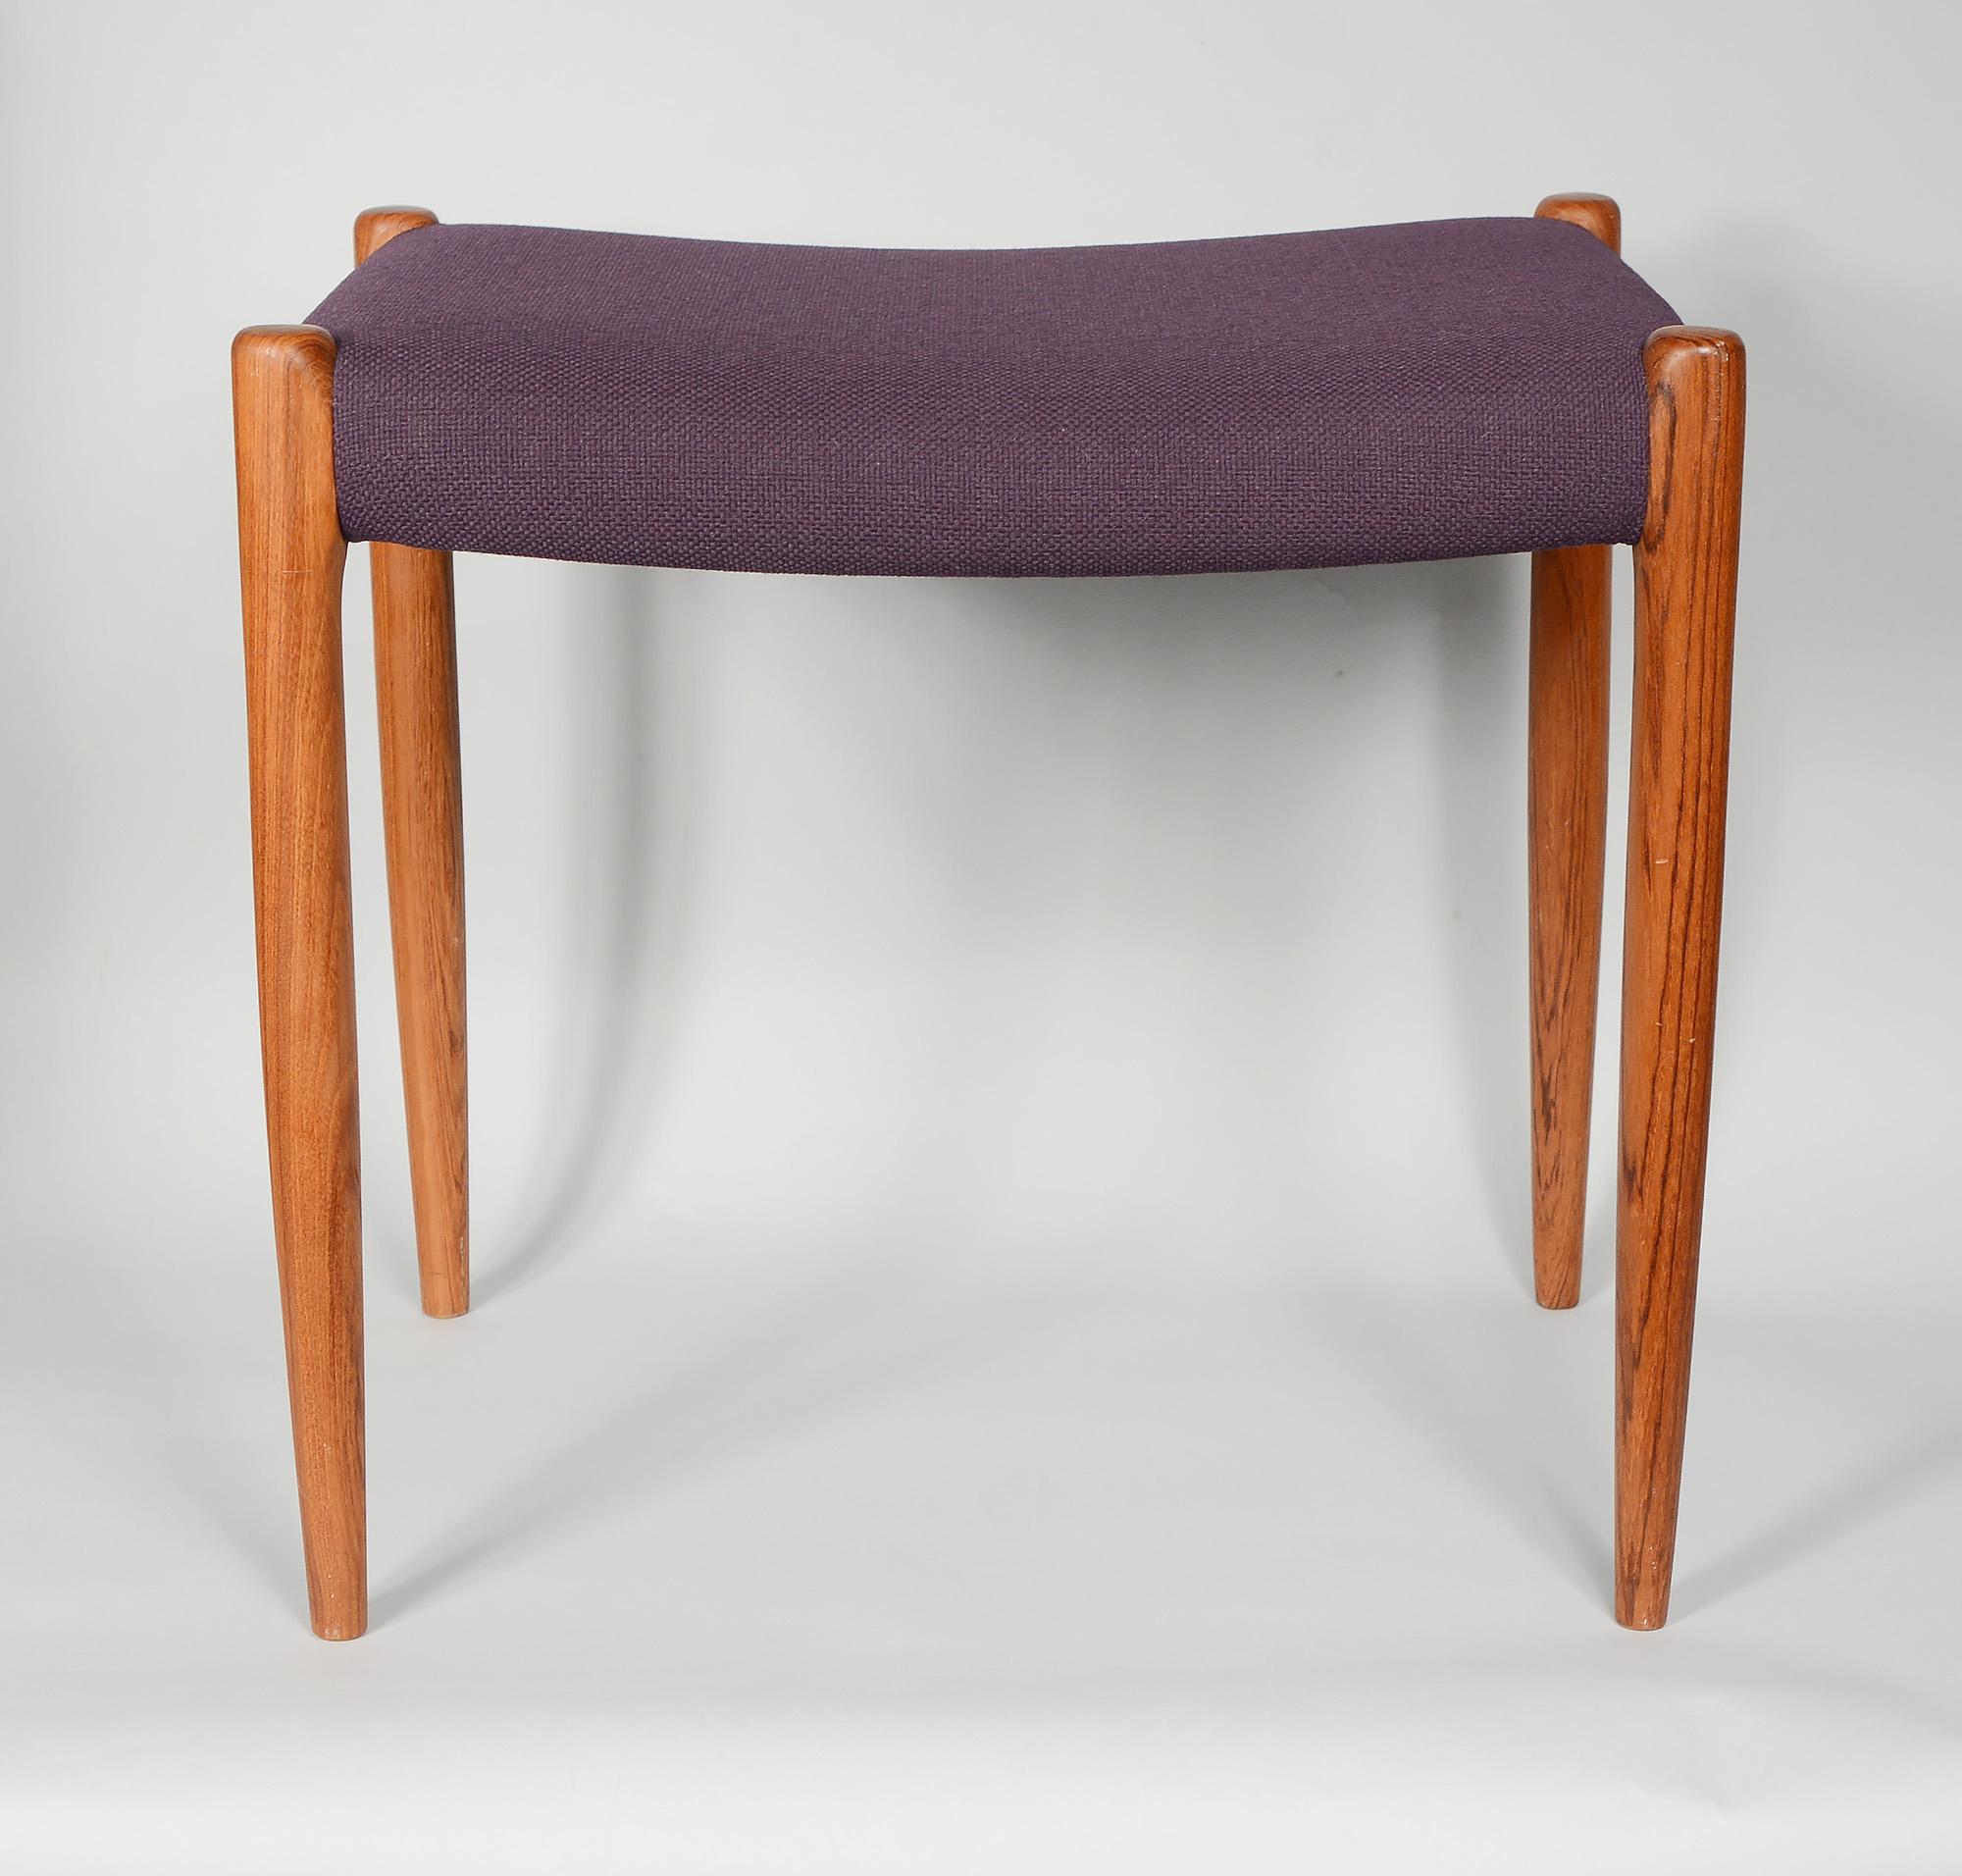 Model 80a stool designed by Niels Otto Moller and manufactured by J.L. Moller of Denmark. This has teal legs with an upholstered seat. The upholstery is possibly original but may be an older reupholster. The wool fabric is in good condition. This